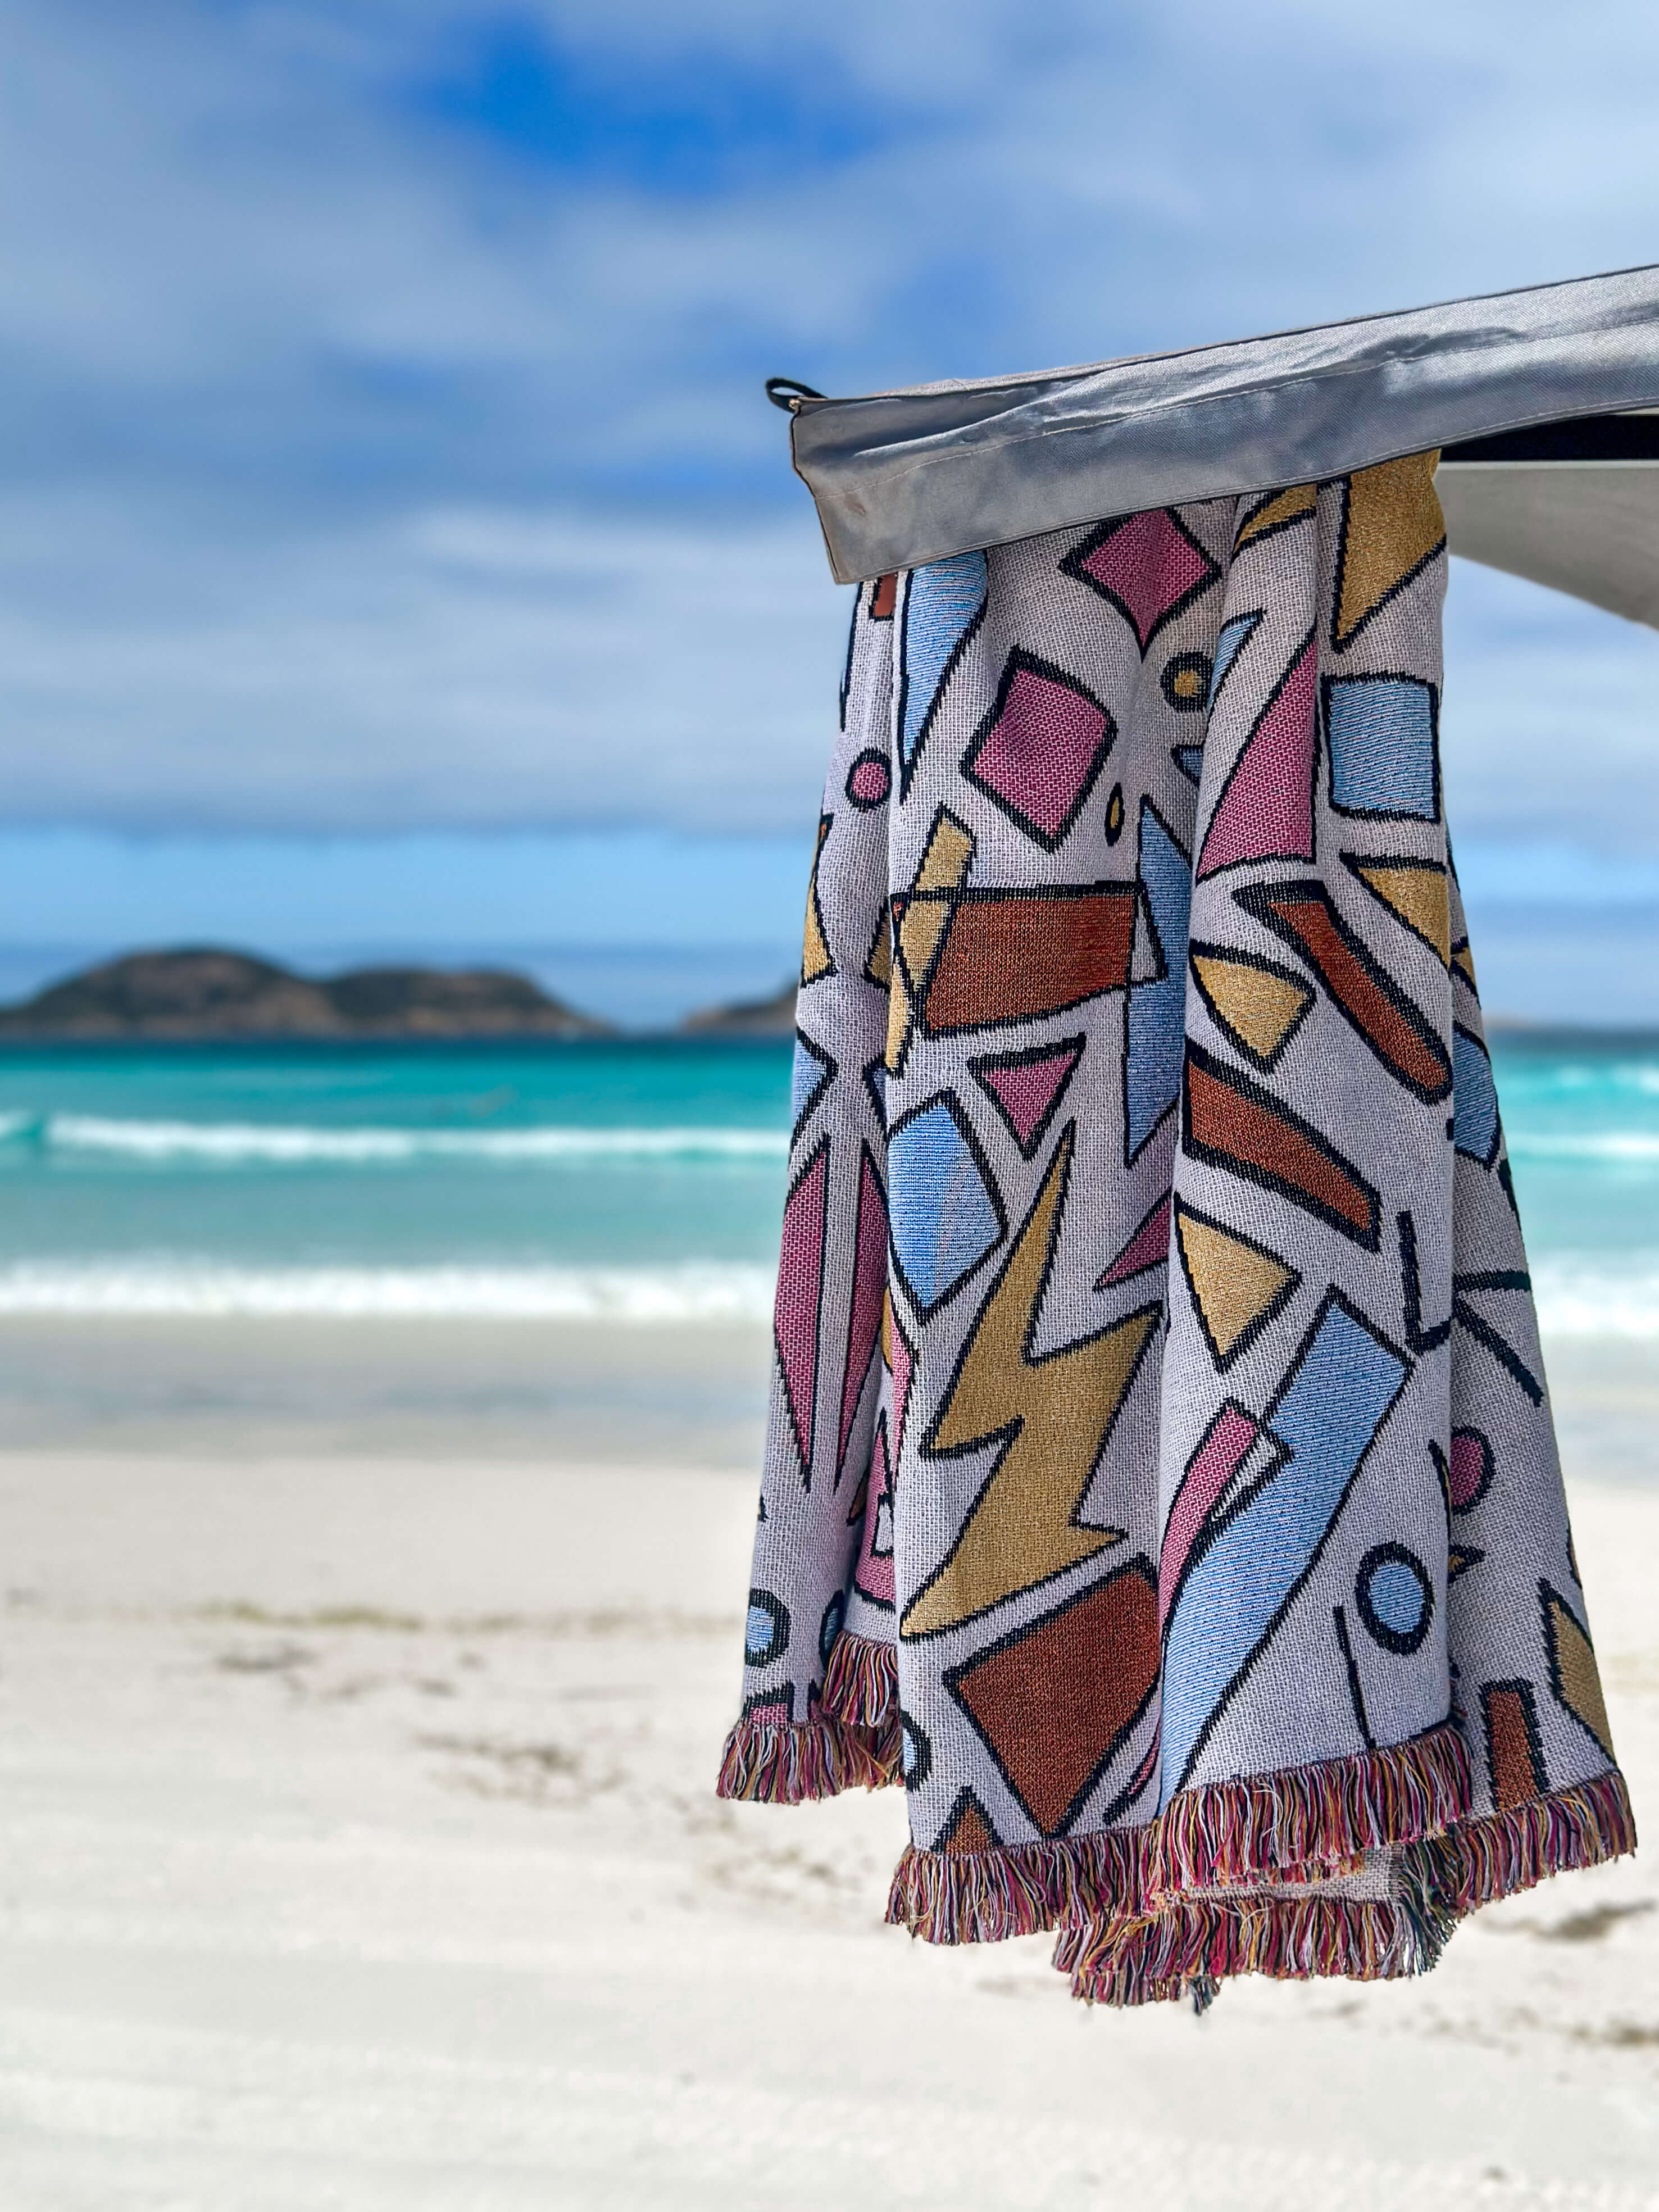 Just Ace throw rug beach blanket 90s vibe colourful design. Designed in Australia. Generous size perfect for van life camping and adventure.